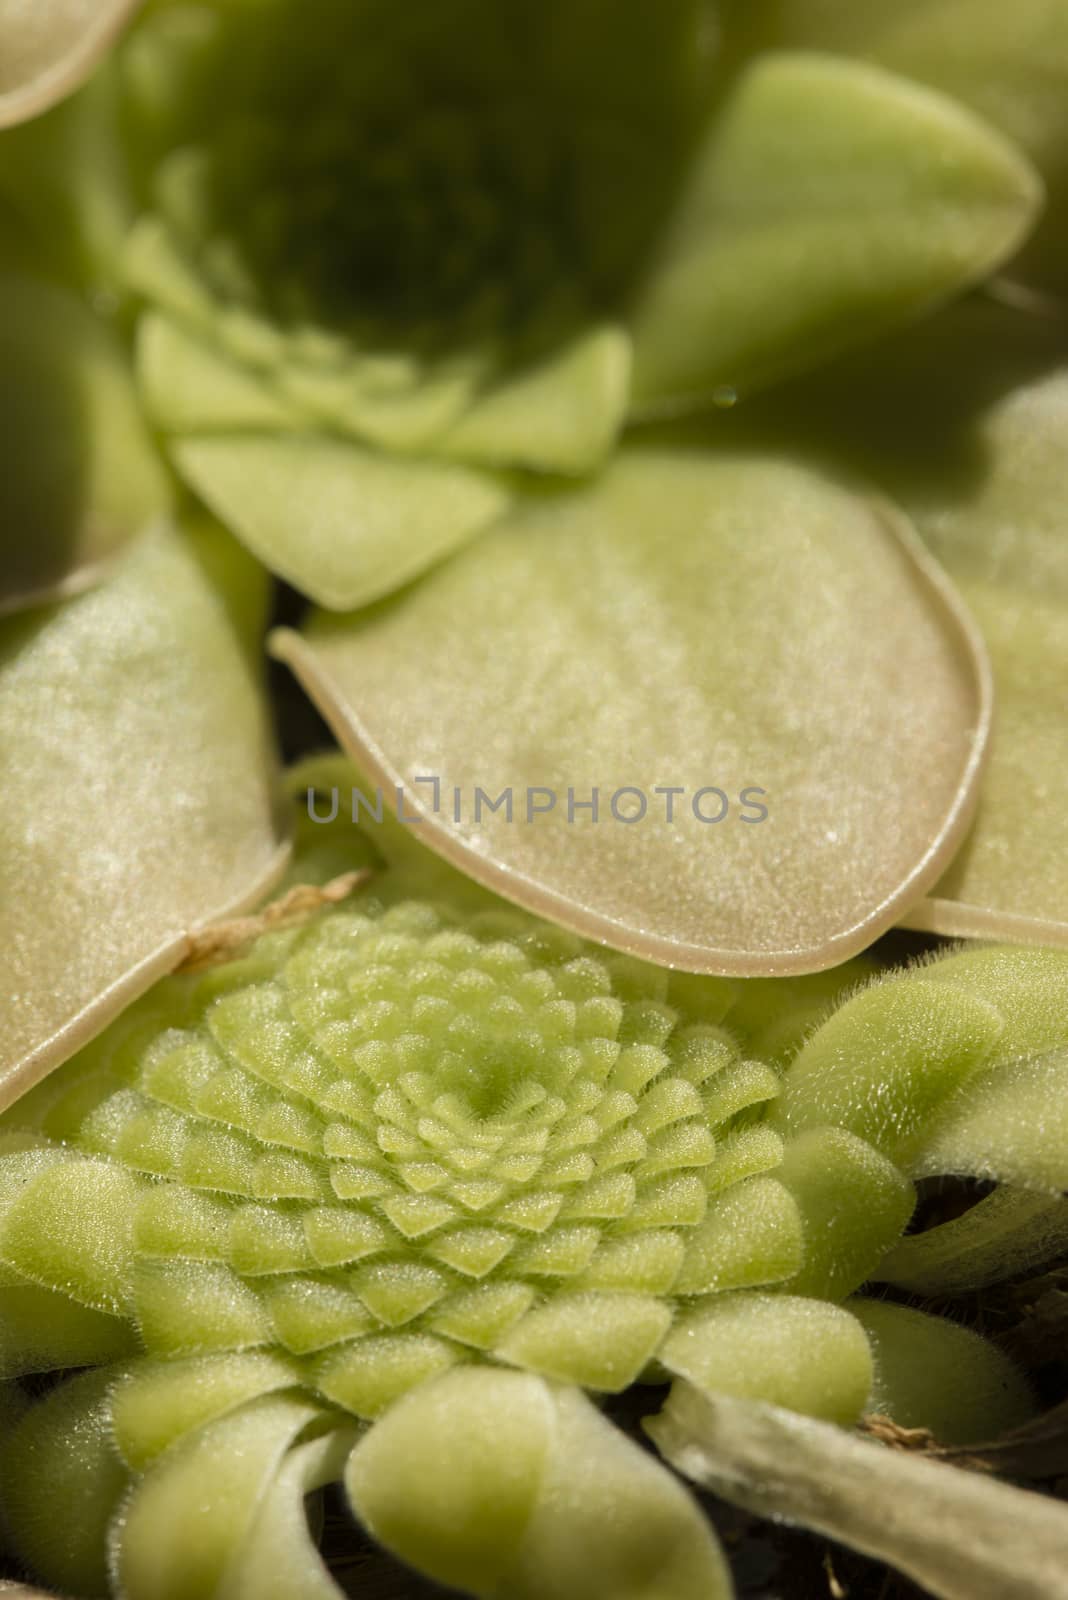 Plants and flower of insectivorous Pinguicula. by AlessandroZocc